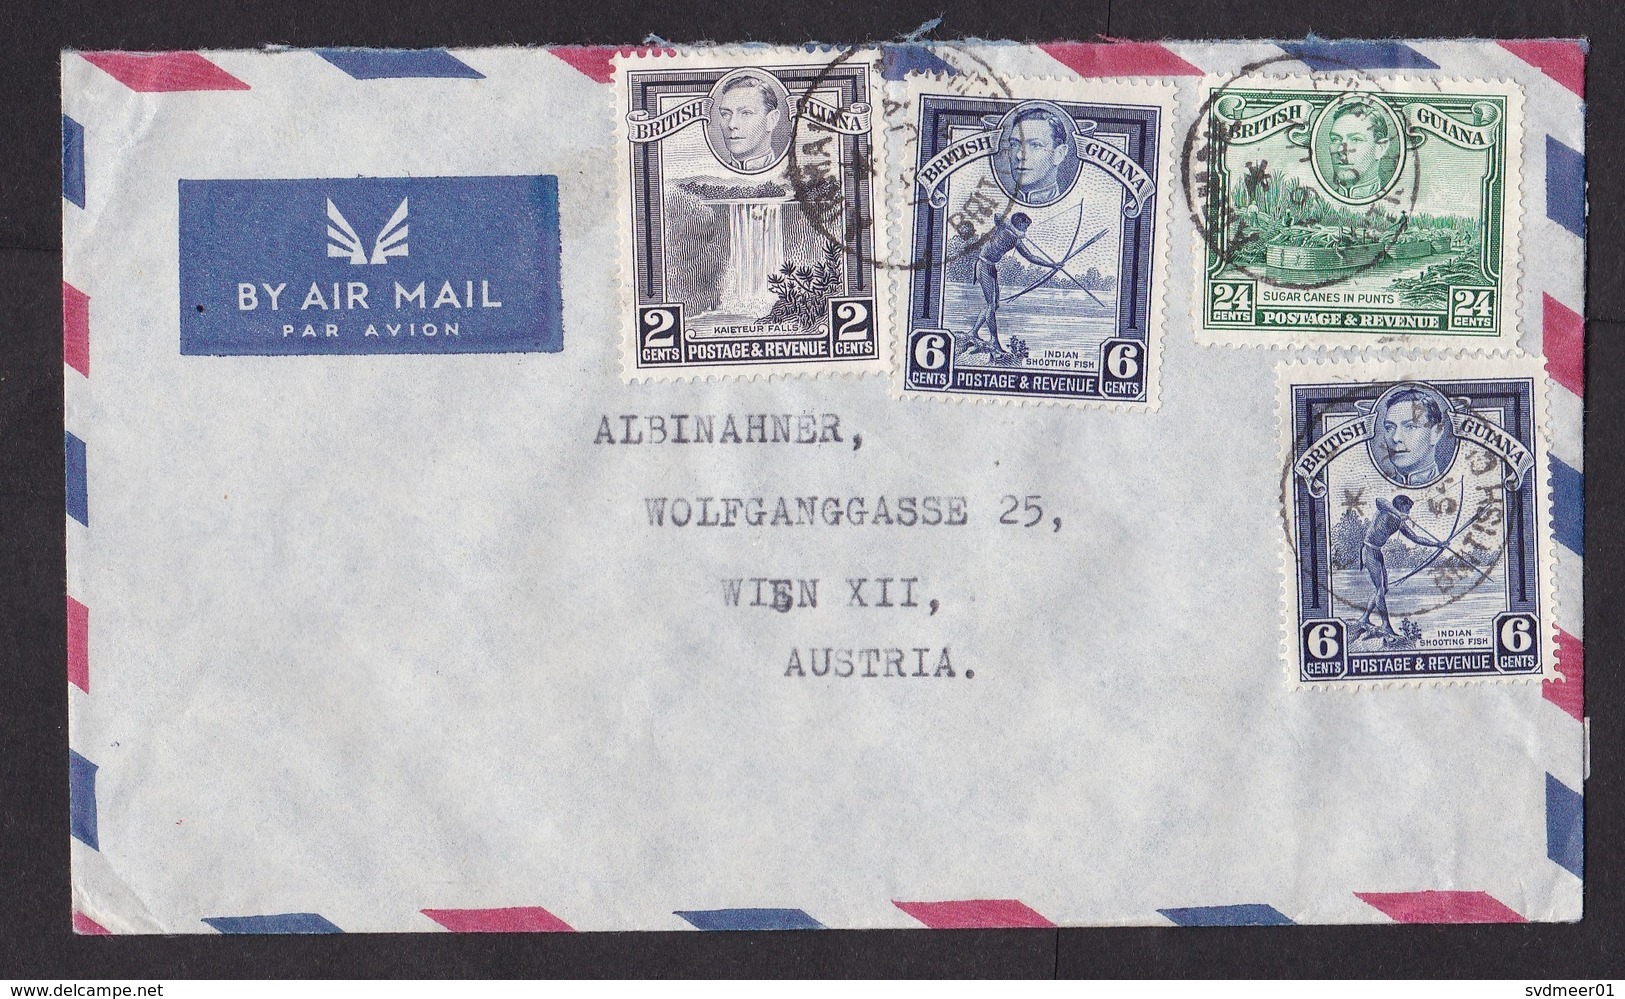 British Guiana: Airmail Cover To Austria, 1954, 4 Stamps, George VI, Waterfall, Fishing, Sugar Cane Ship (traces Of Use) - Guyane Britannique (...-1966)